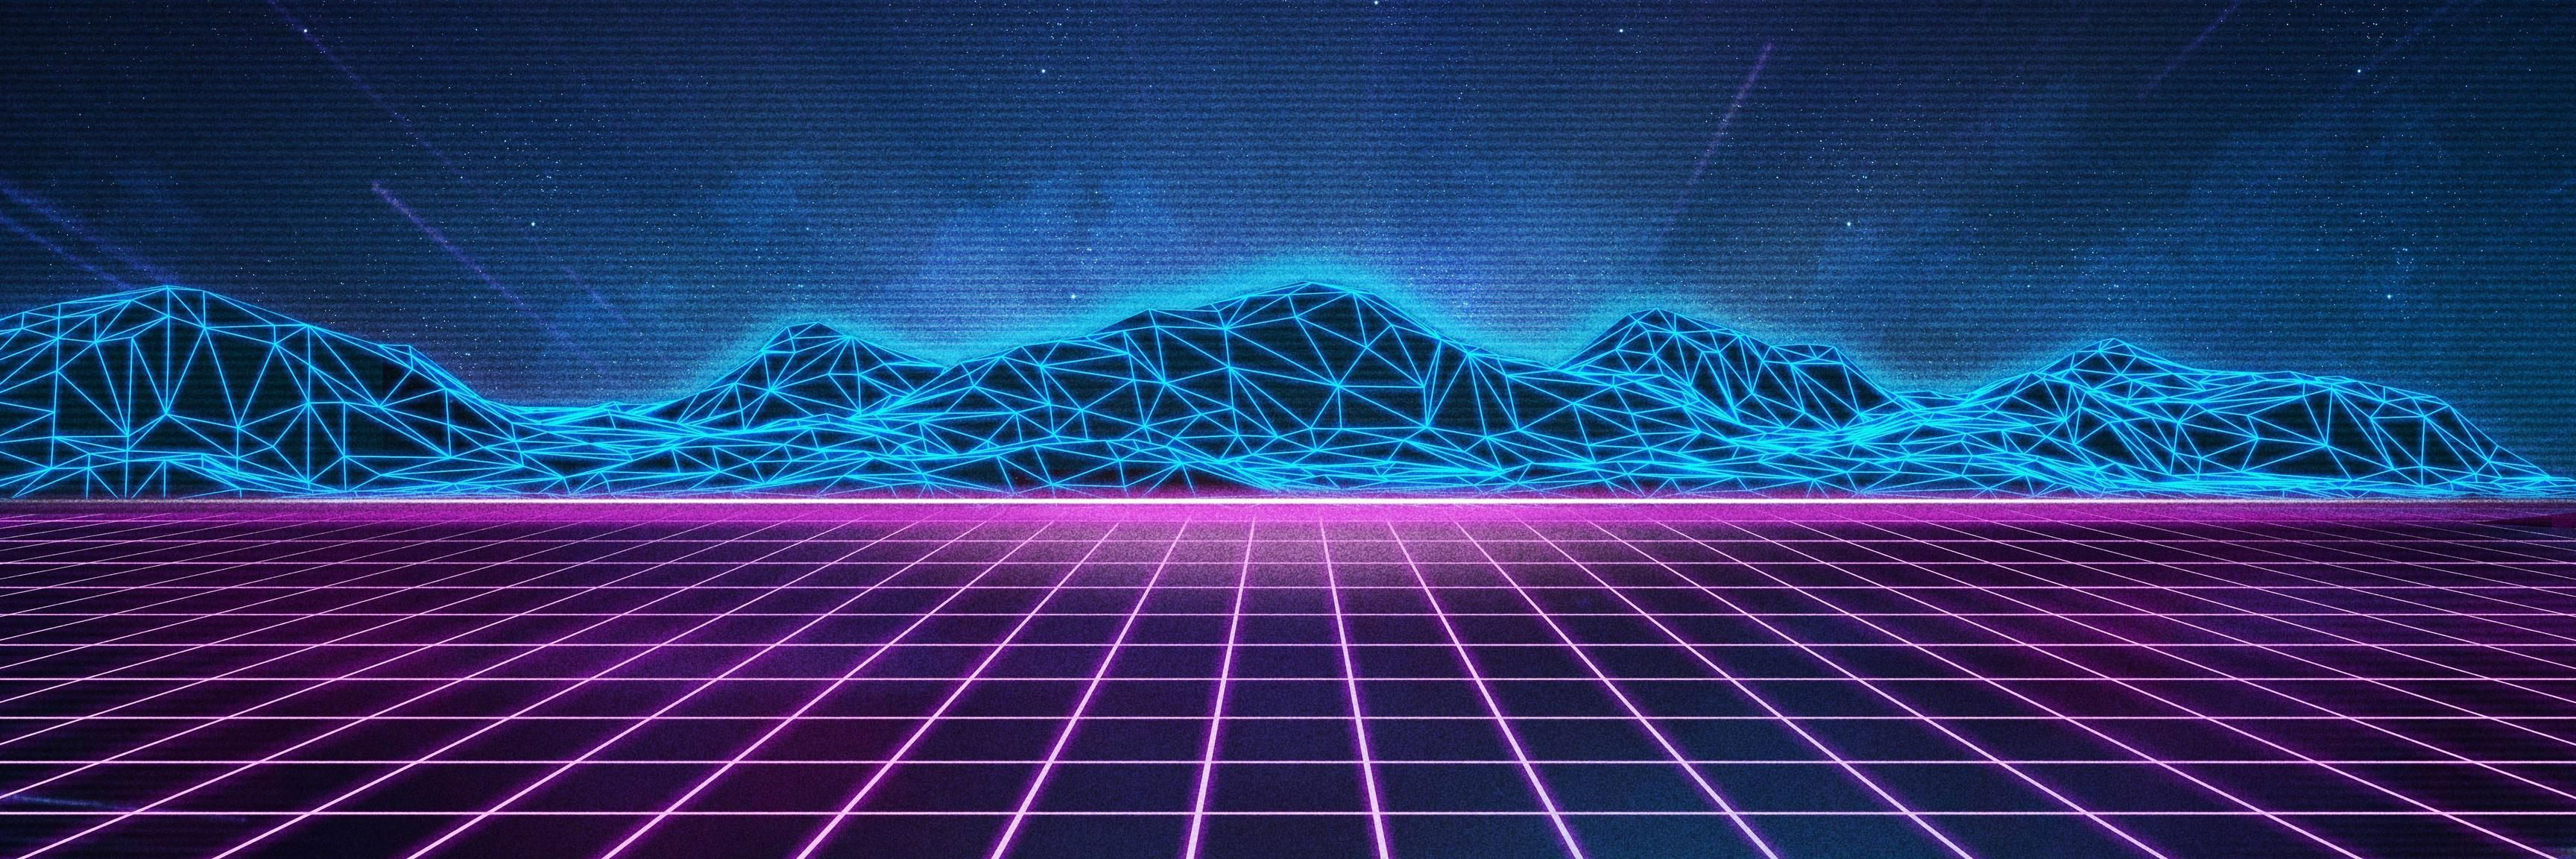 80s Grid Wallpaper Free 80s Grid Background